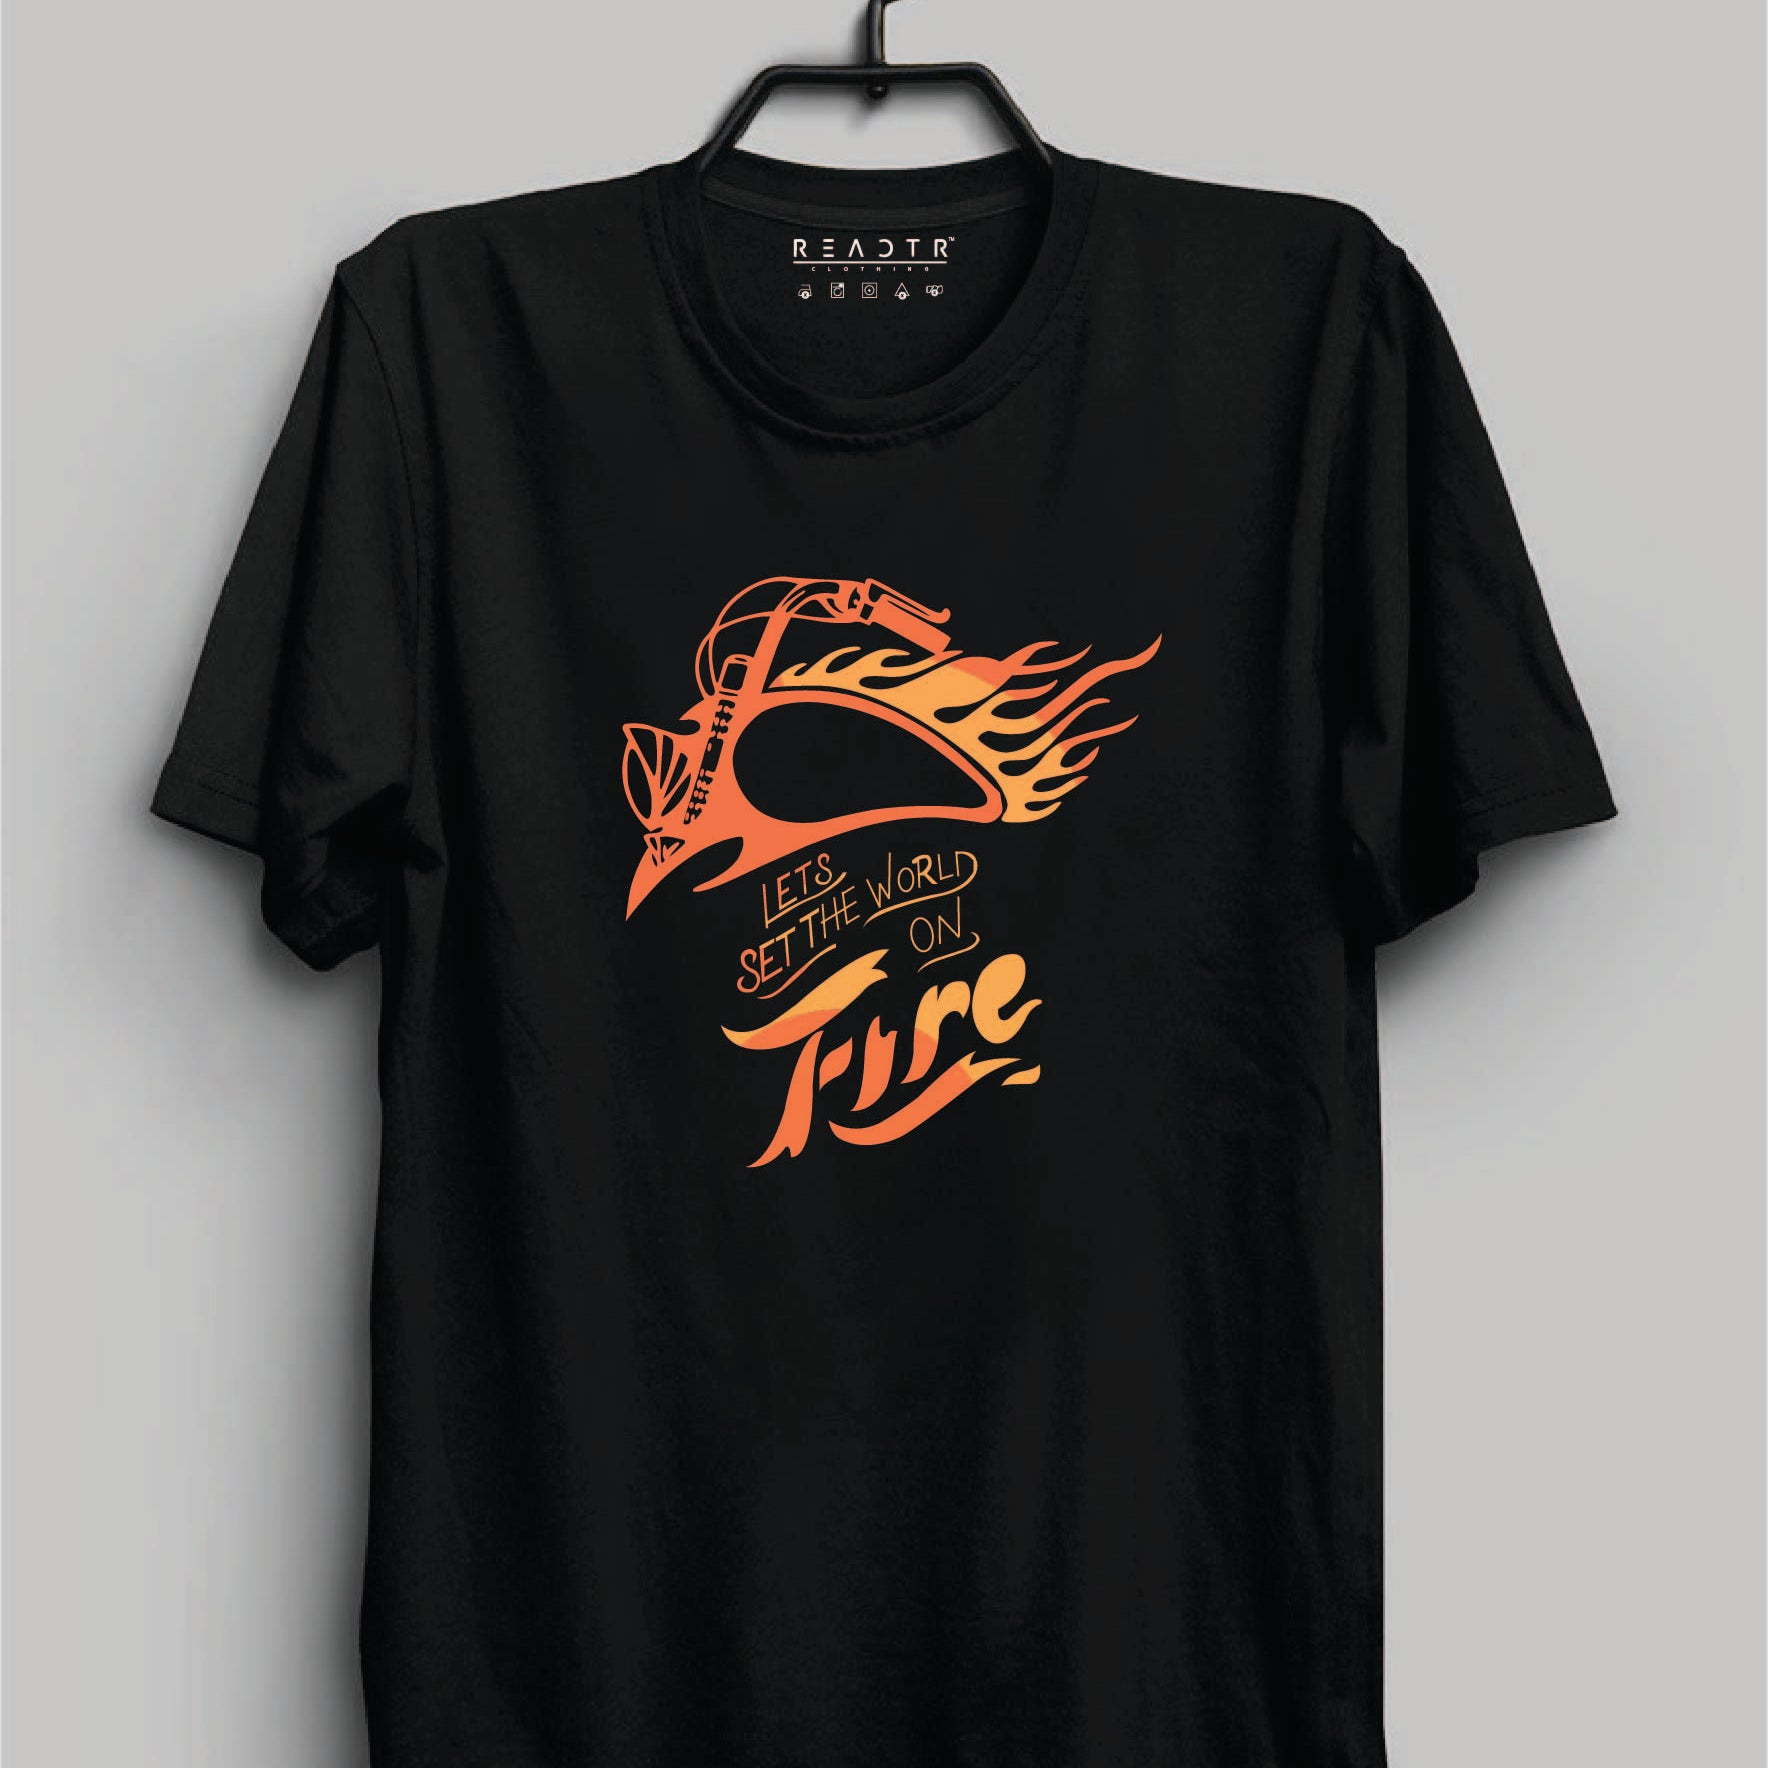 Lets Set The World On Fire Reactr Tshirts For Men - Eyewearlabs